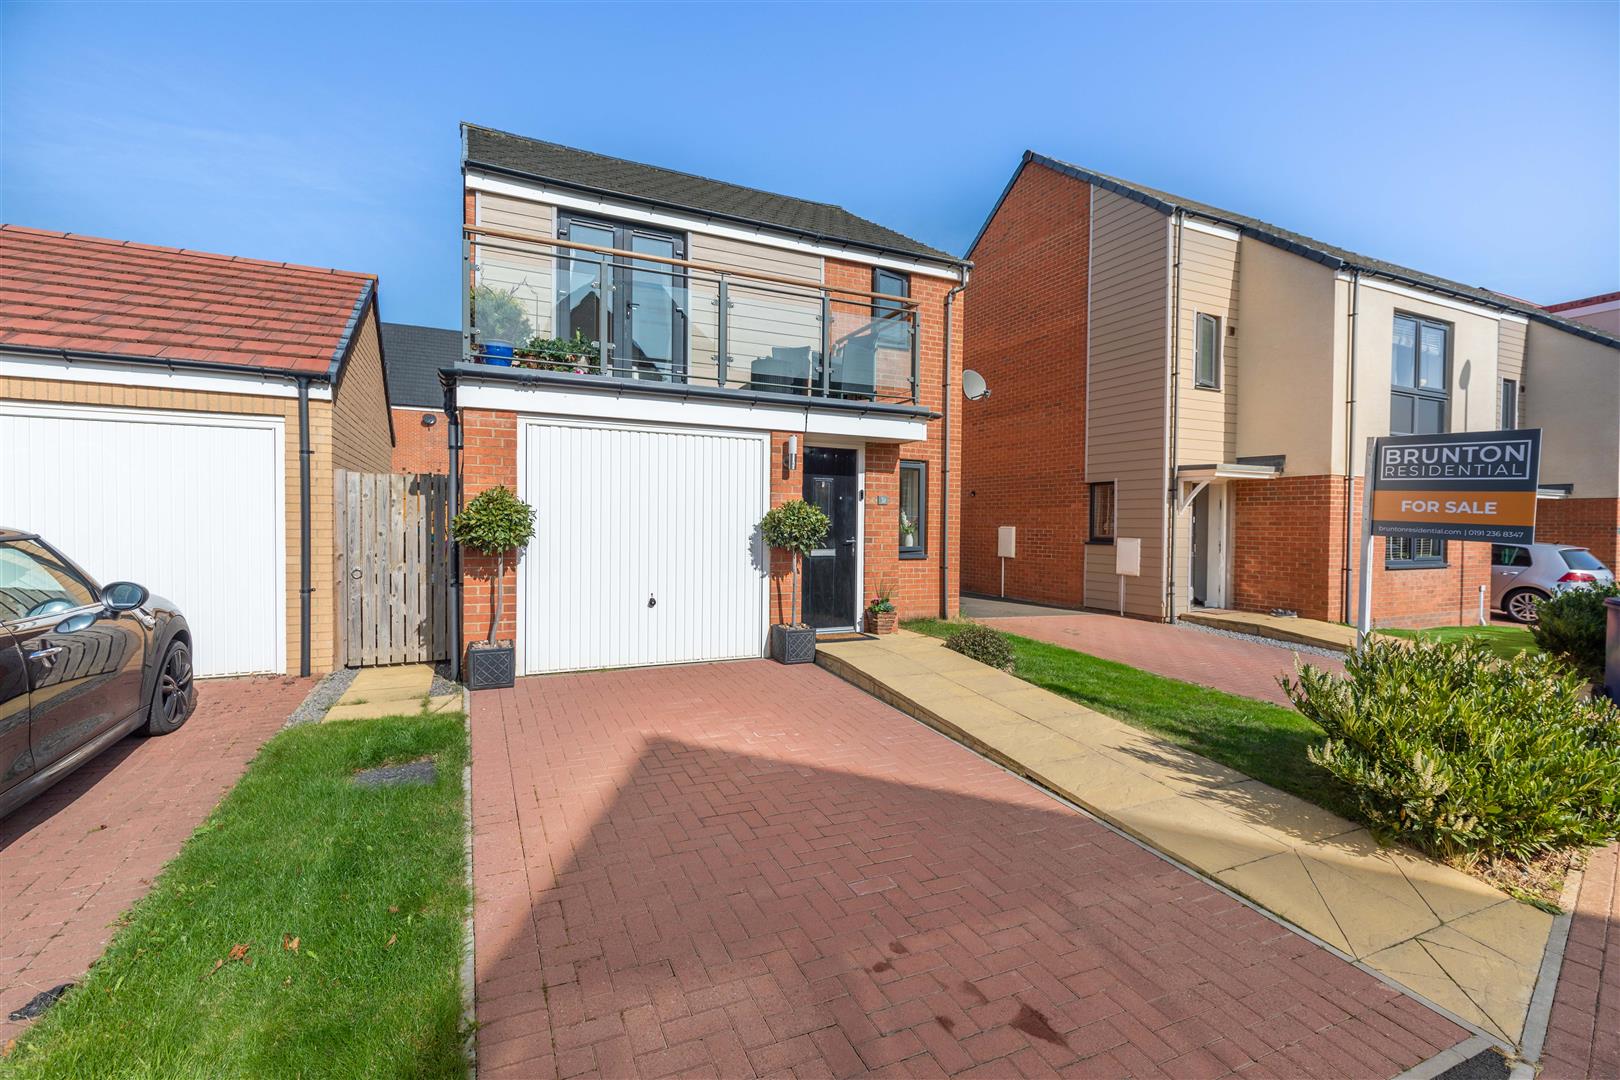 3 bed detached house for sale in Greville Gardens, Newcastle Upon Tyne - Property Image 1